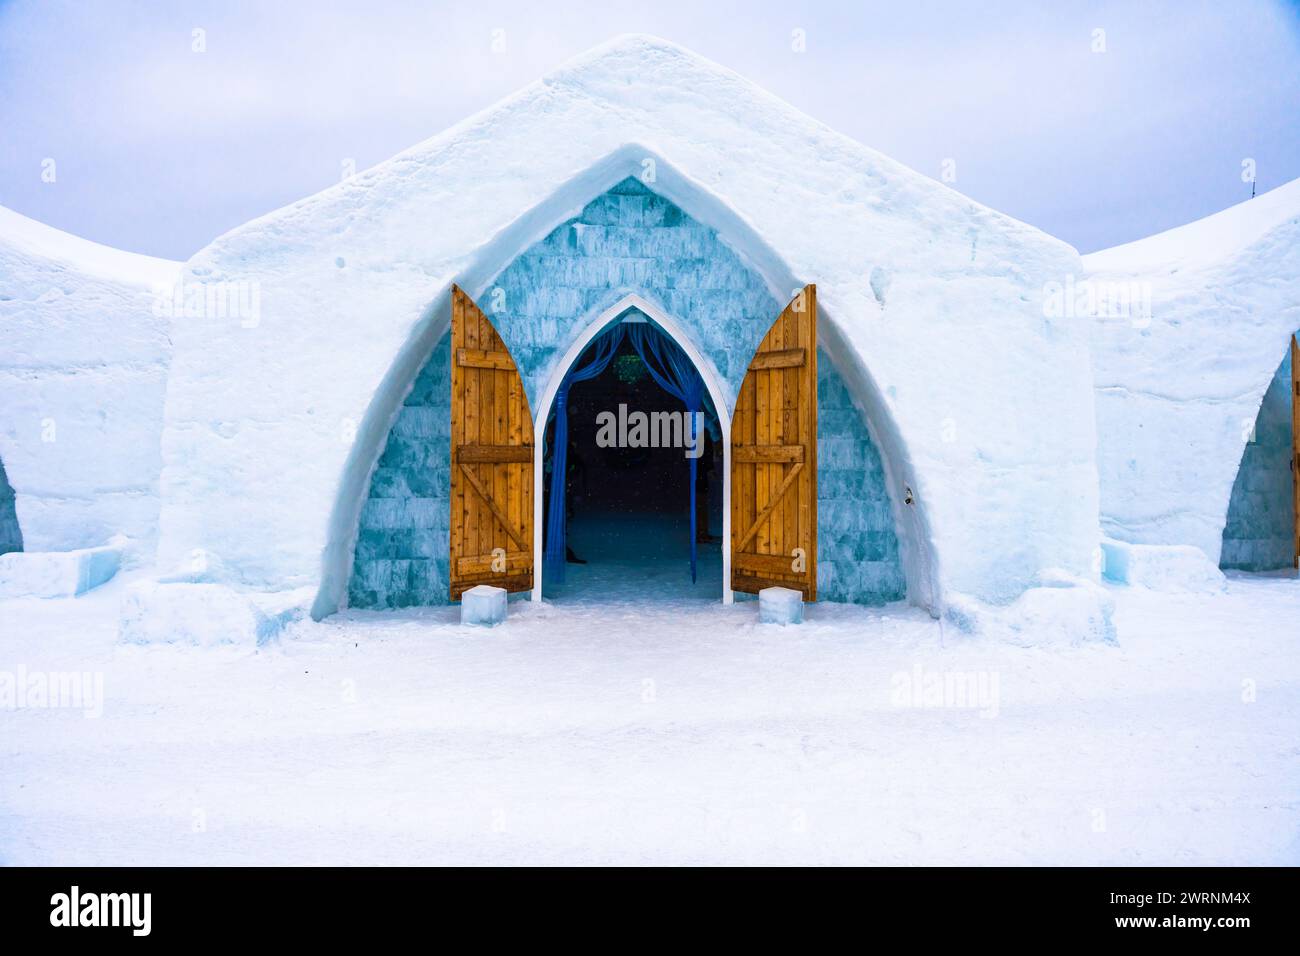 Modernized Igloo with wooden door and ice blue entrance to opened building made entirely of ice during blizzard Stock Photo